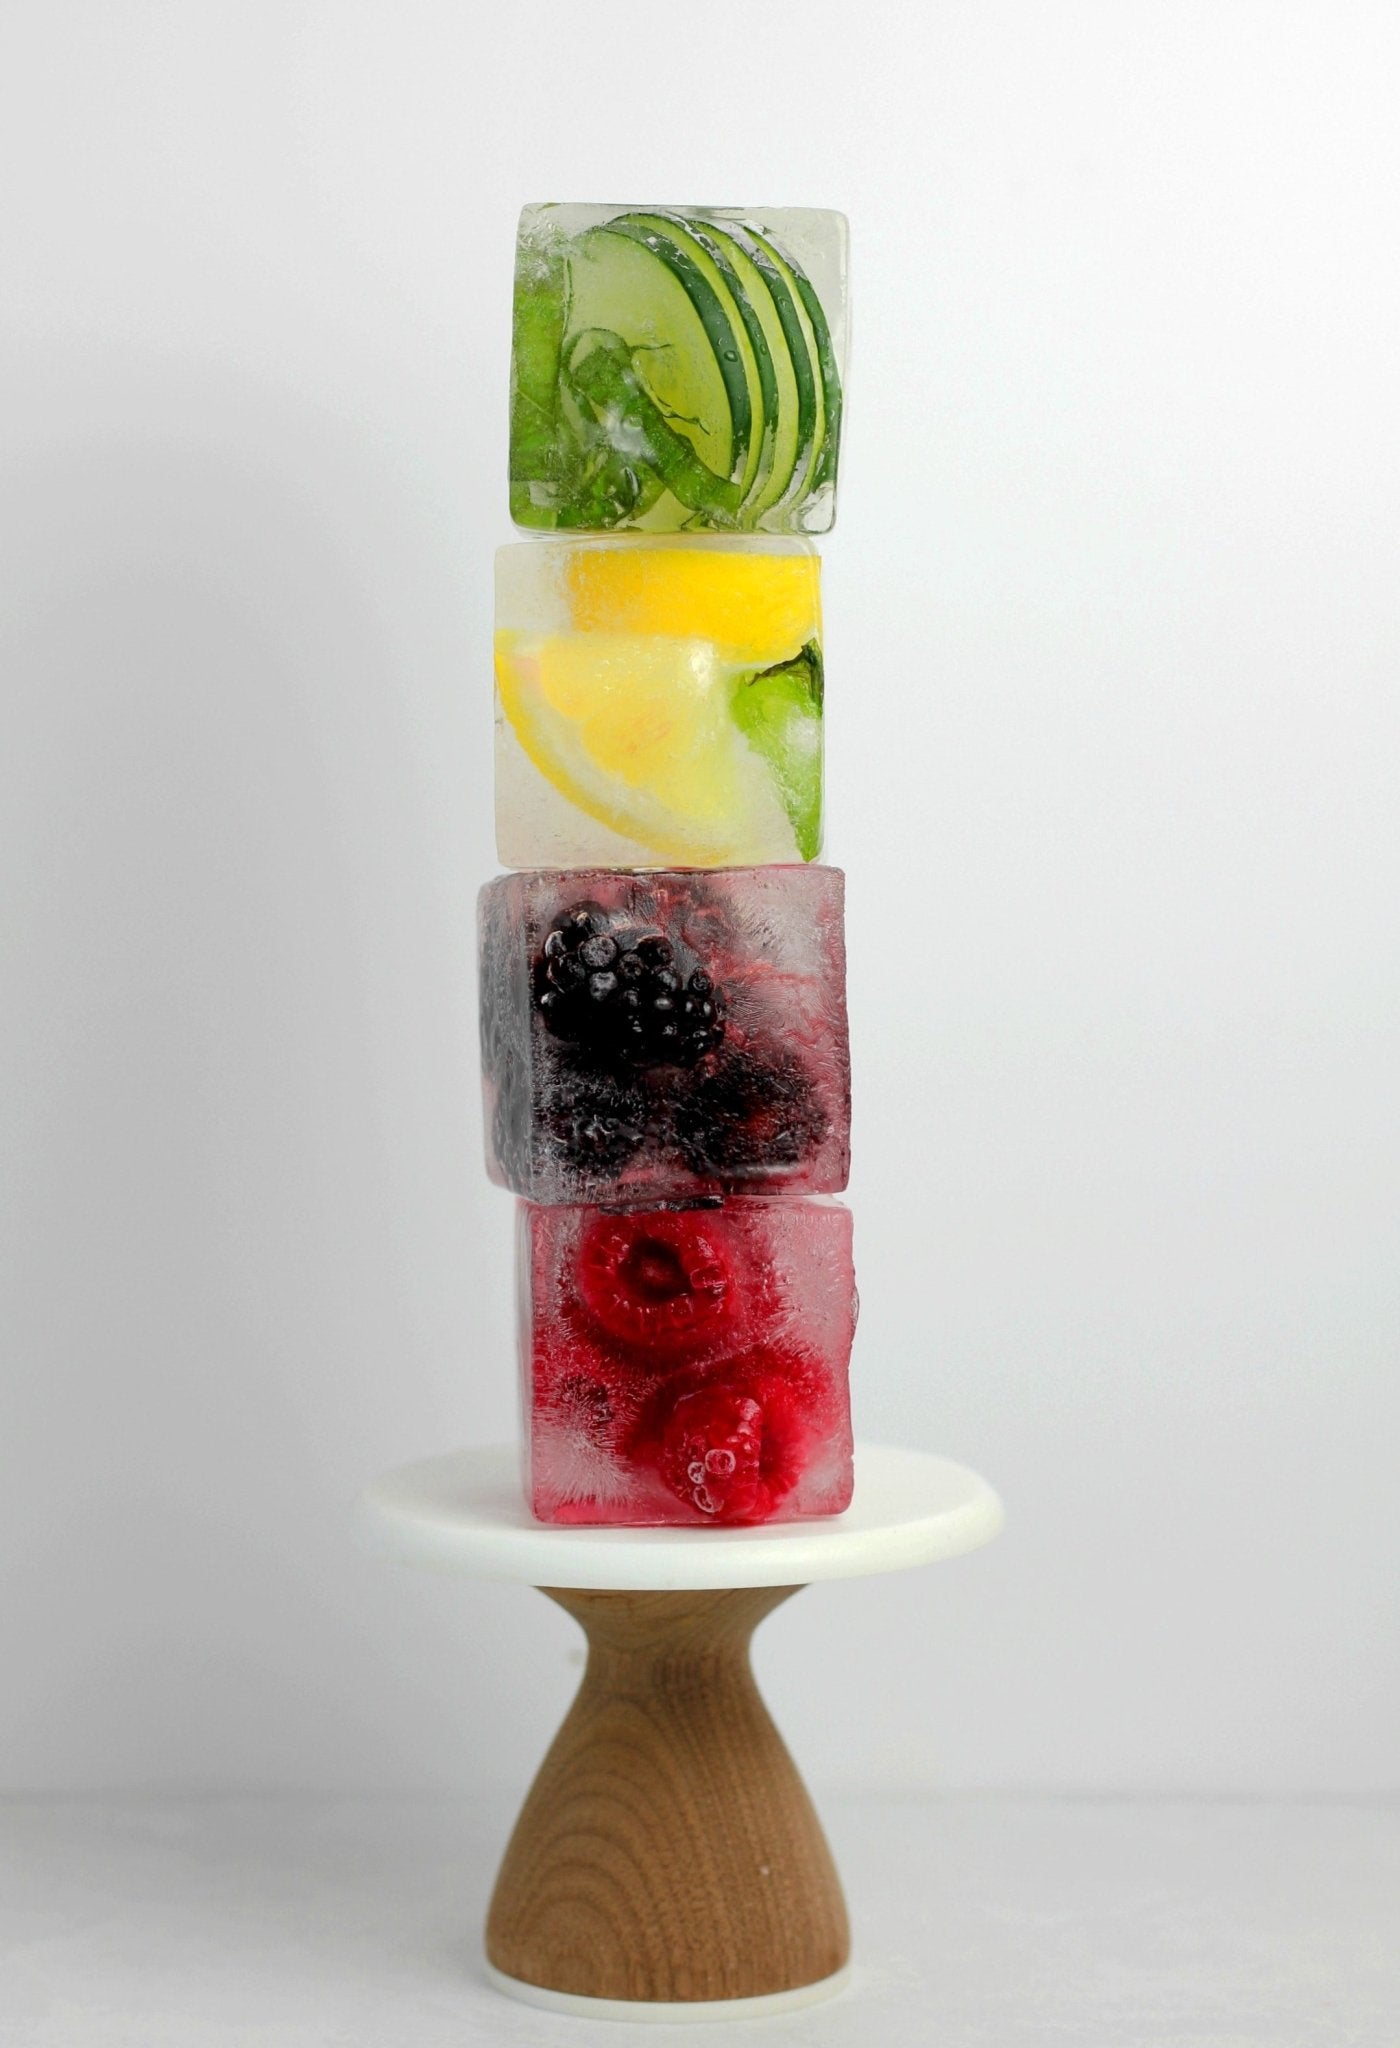 Spice Up Your Ice: Flavorful Freezes To Freshen Up Your Drink - Antsy Labs